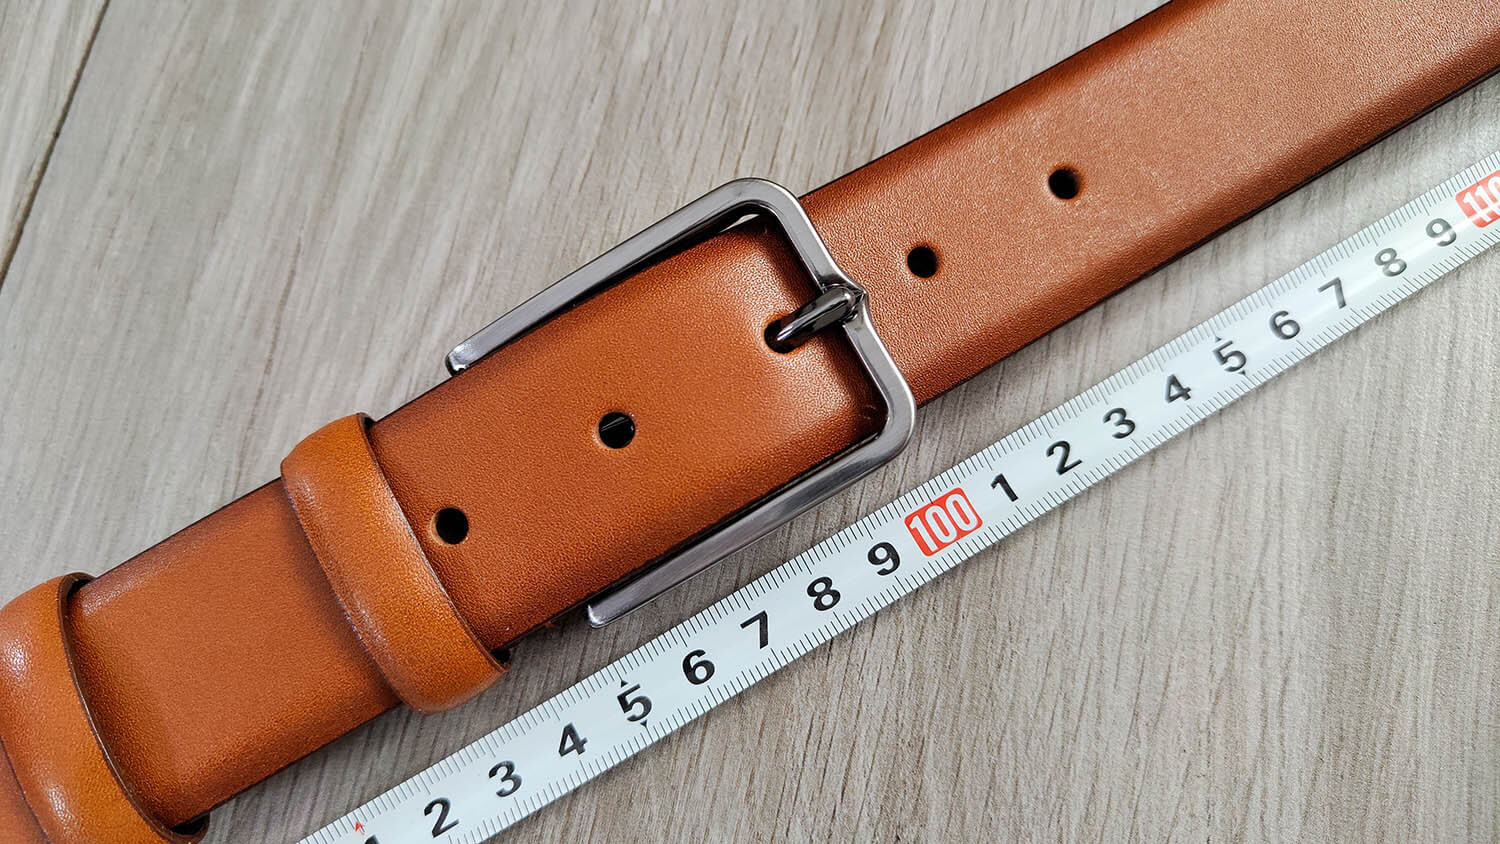 How to choose the size of the belt